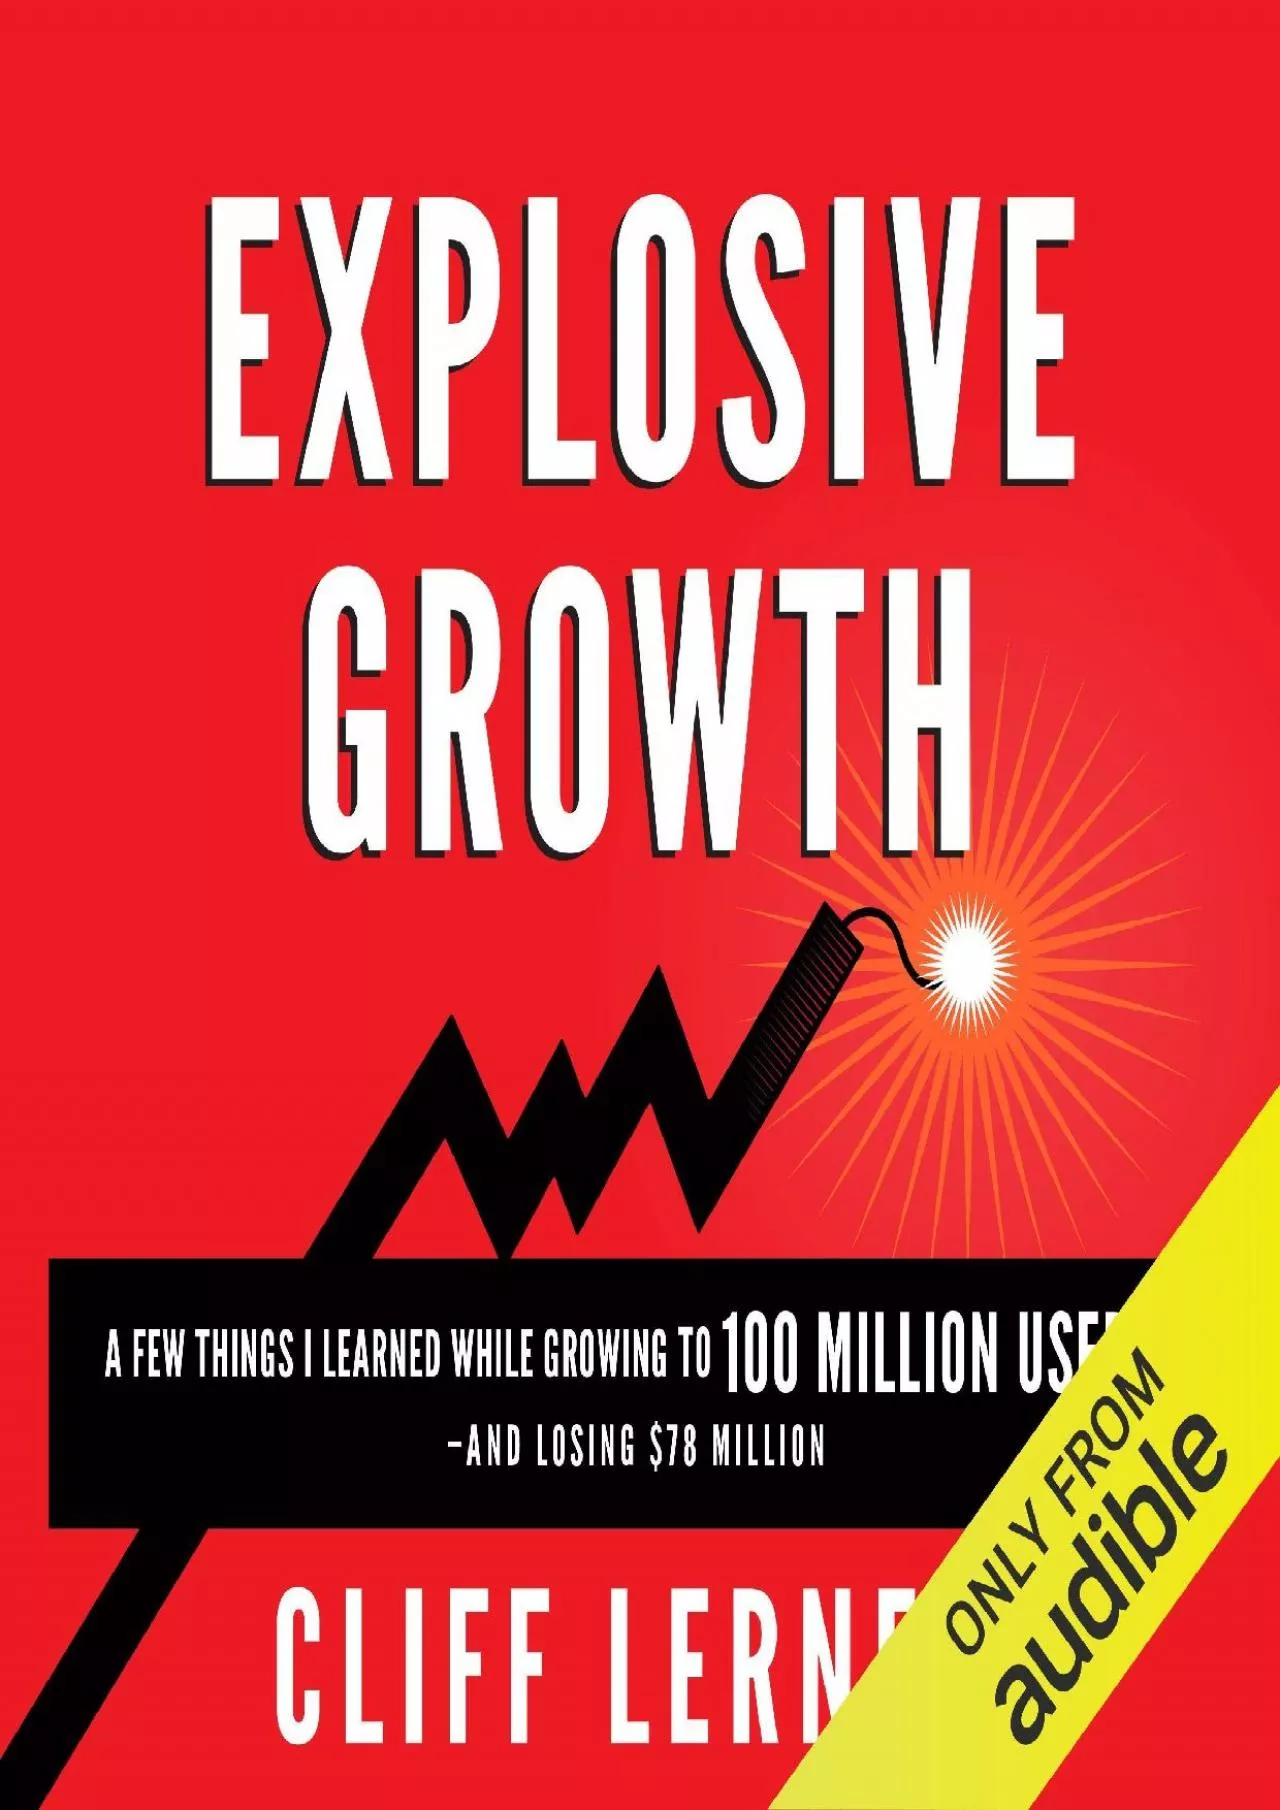 Explosive Growth A Few Things I Learned While Growing to 100 Million Users and Losing